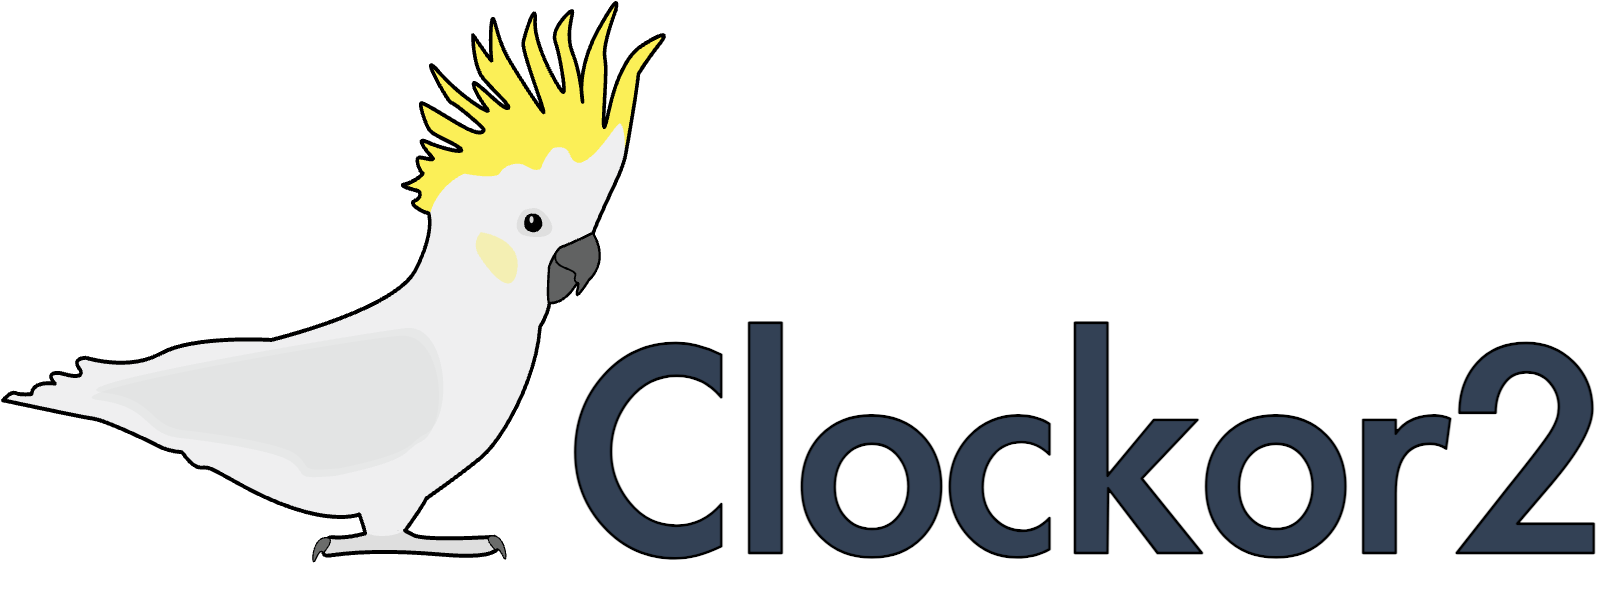 Clockor2: Inferring global and local strict molecular clocks using root-to-tip regression